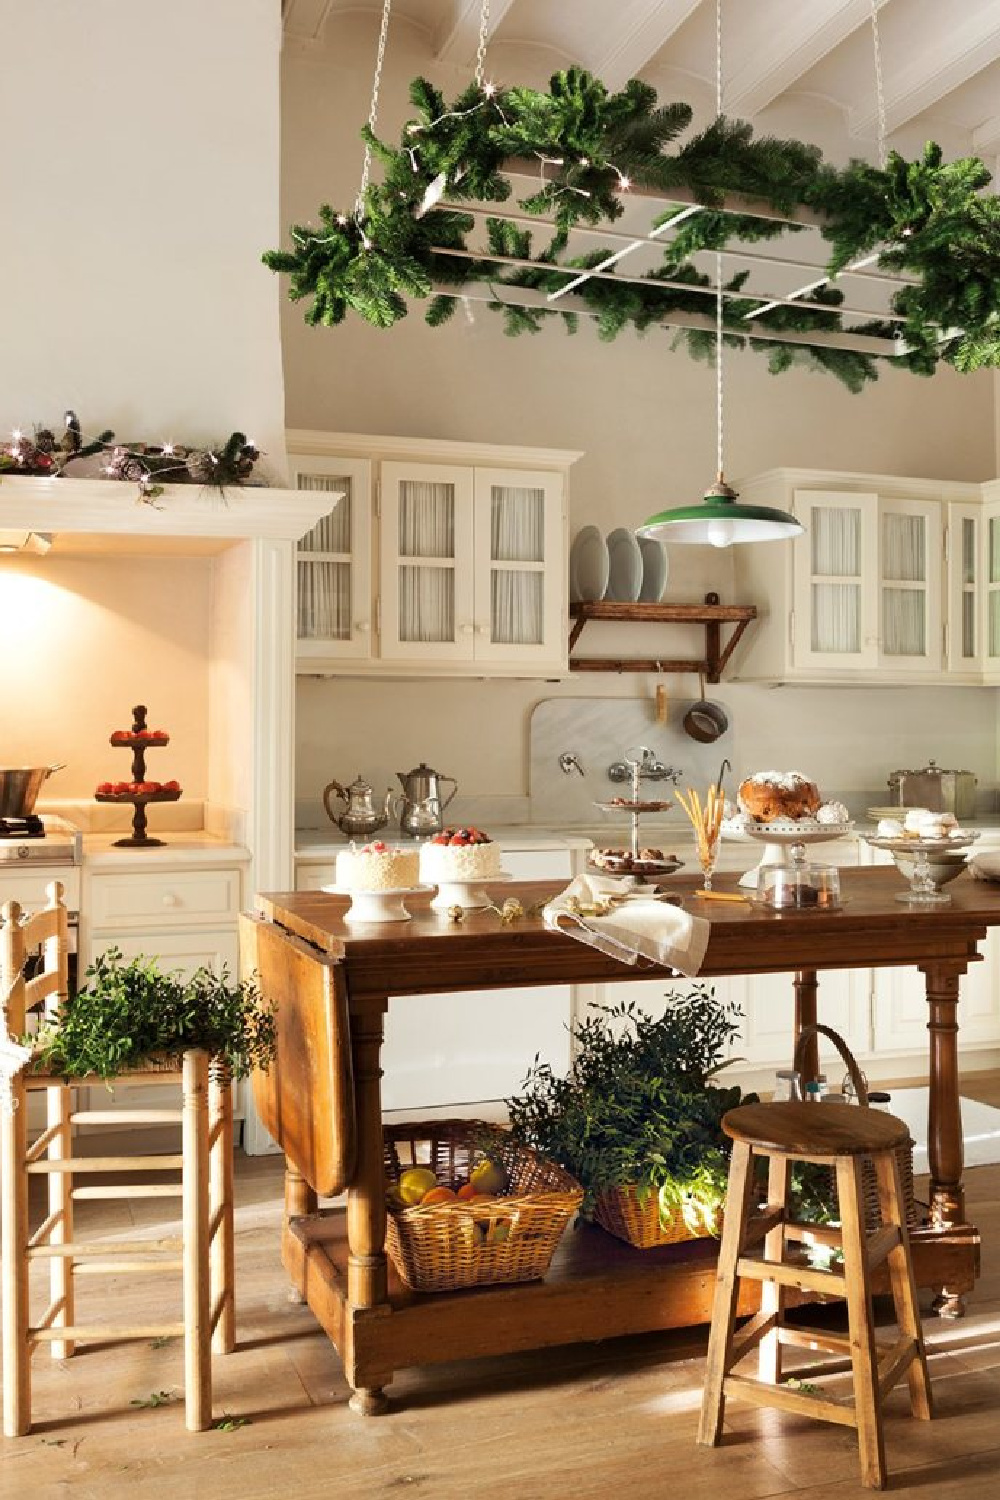 Christmas kitchen with French country styling in a 19th century home on the Maresme Coast of Spain. #christmasdecor #housetour #whitechristmas #romanticchristmas #frenchcountry #frenchchristmas #whitedecor